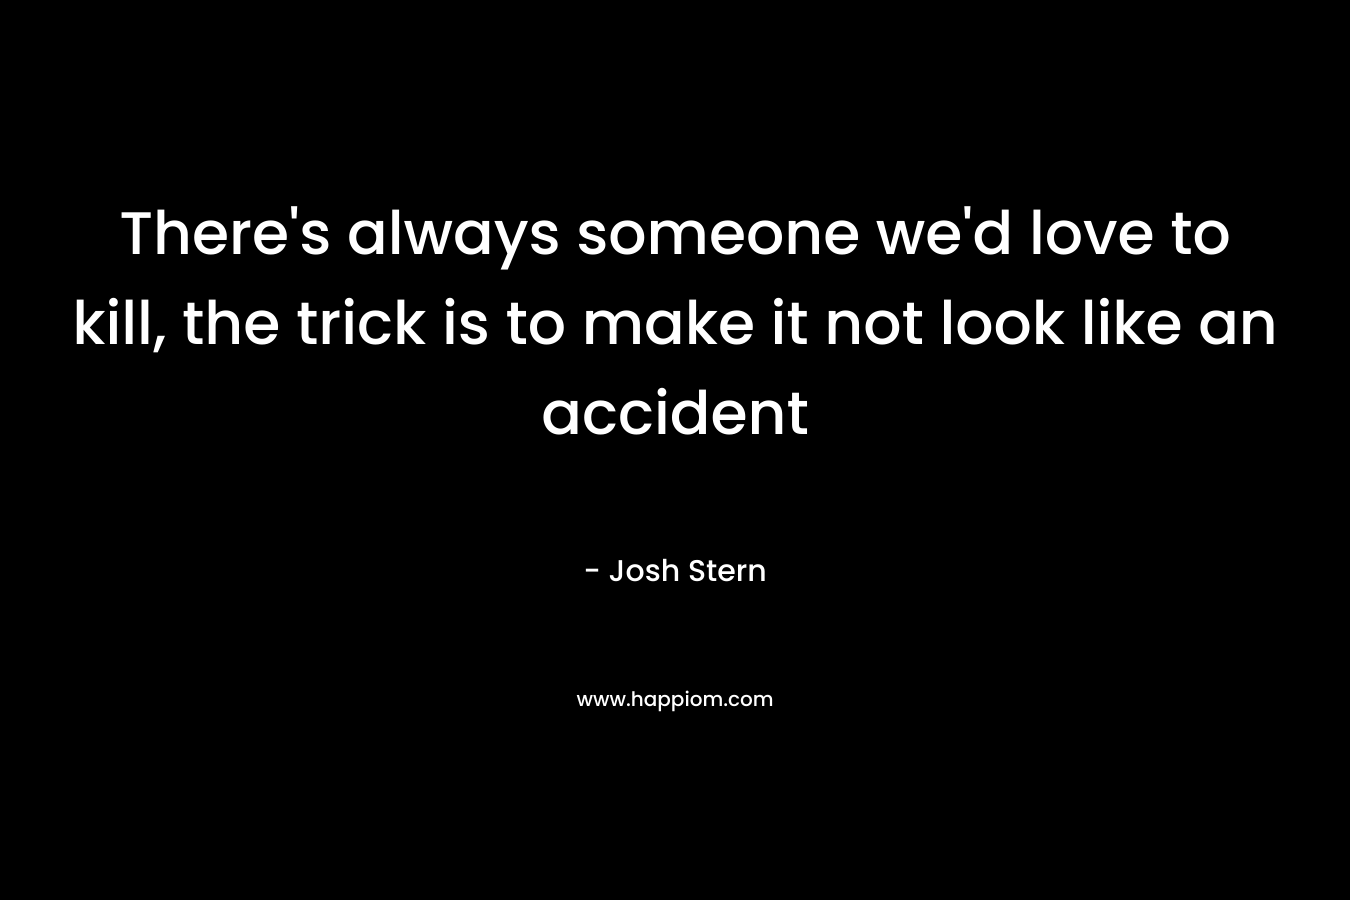 There’s always someone we’d love to kill, the trick is to make it not look like an accident – Josh Stern